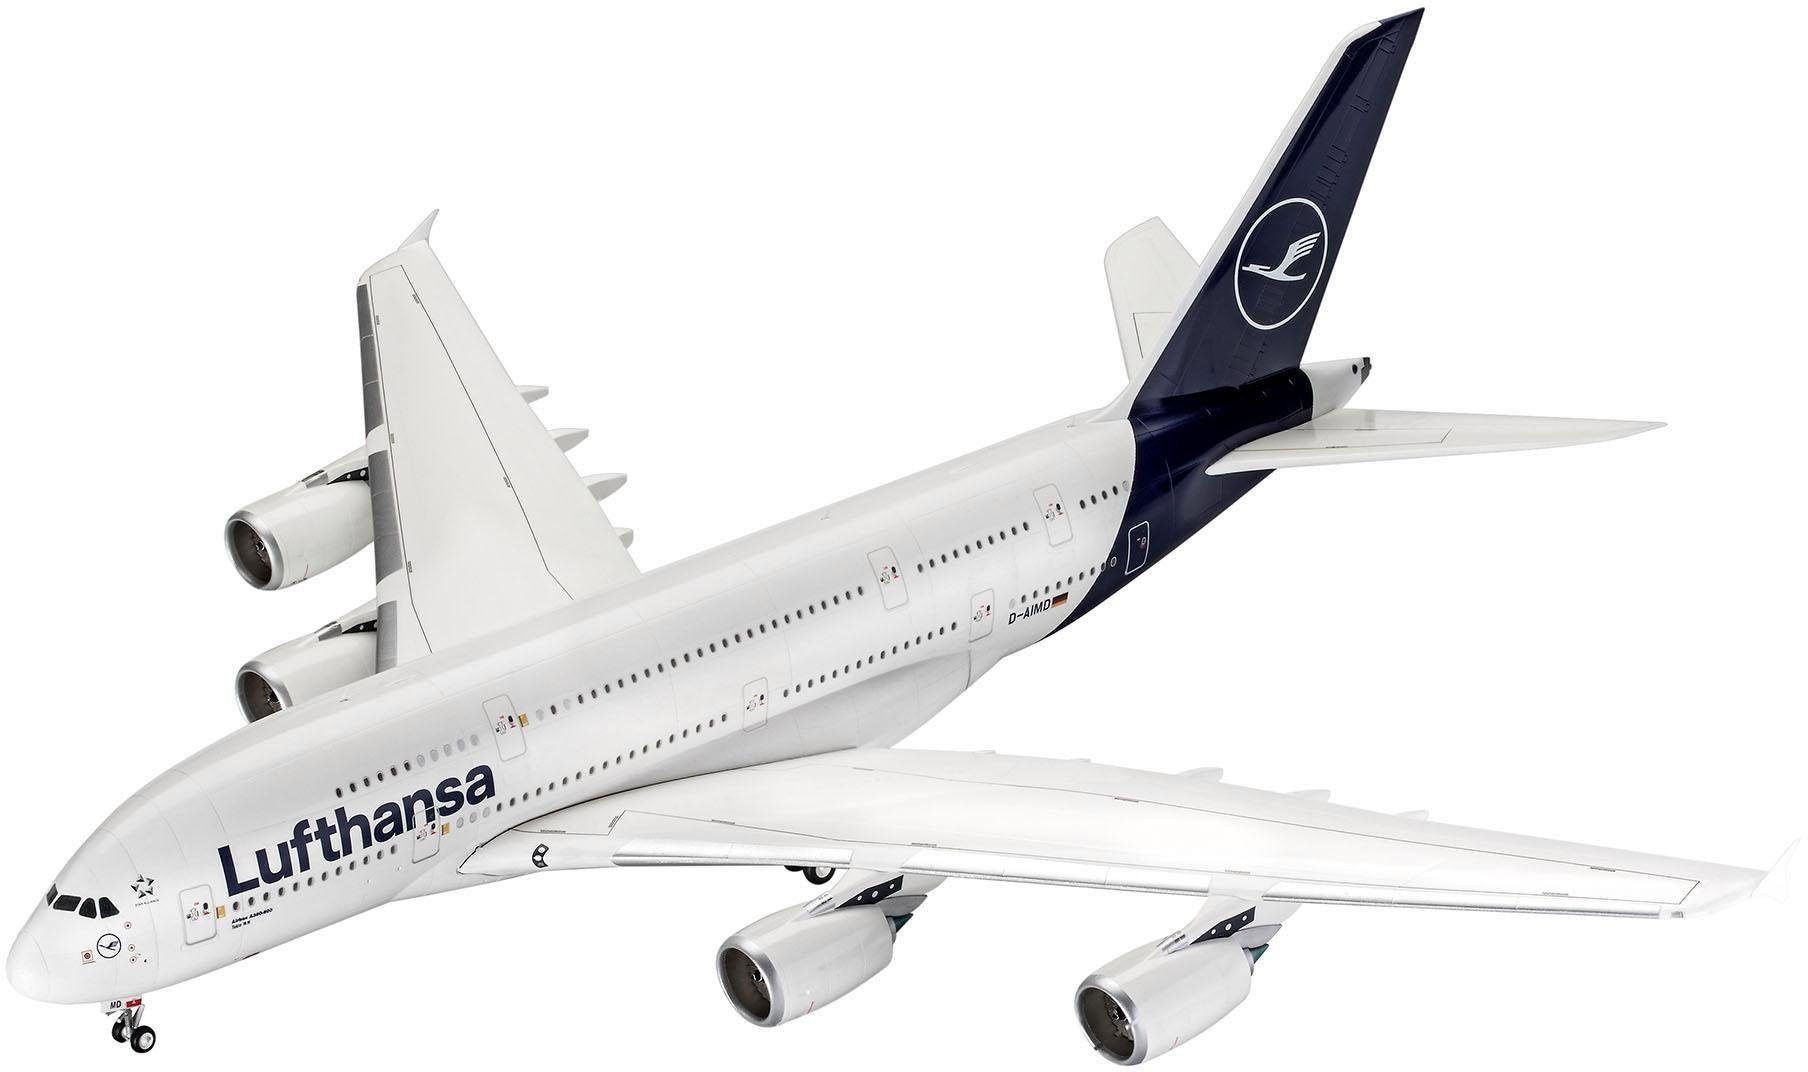 Revell® Modellbausatz »Airbus A380-800 Lufthansa - New Livery«, 1:144, Made in Europe